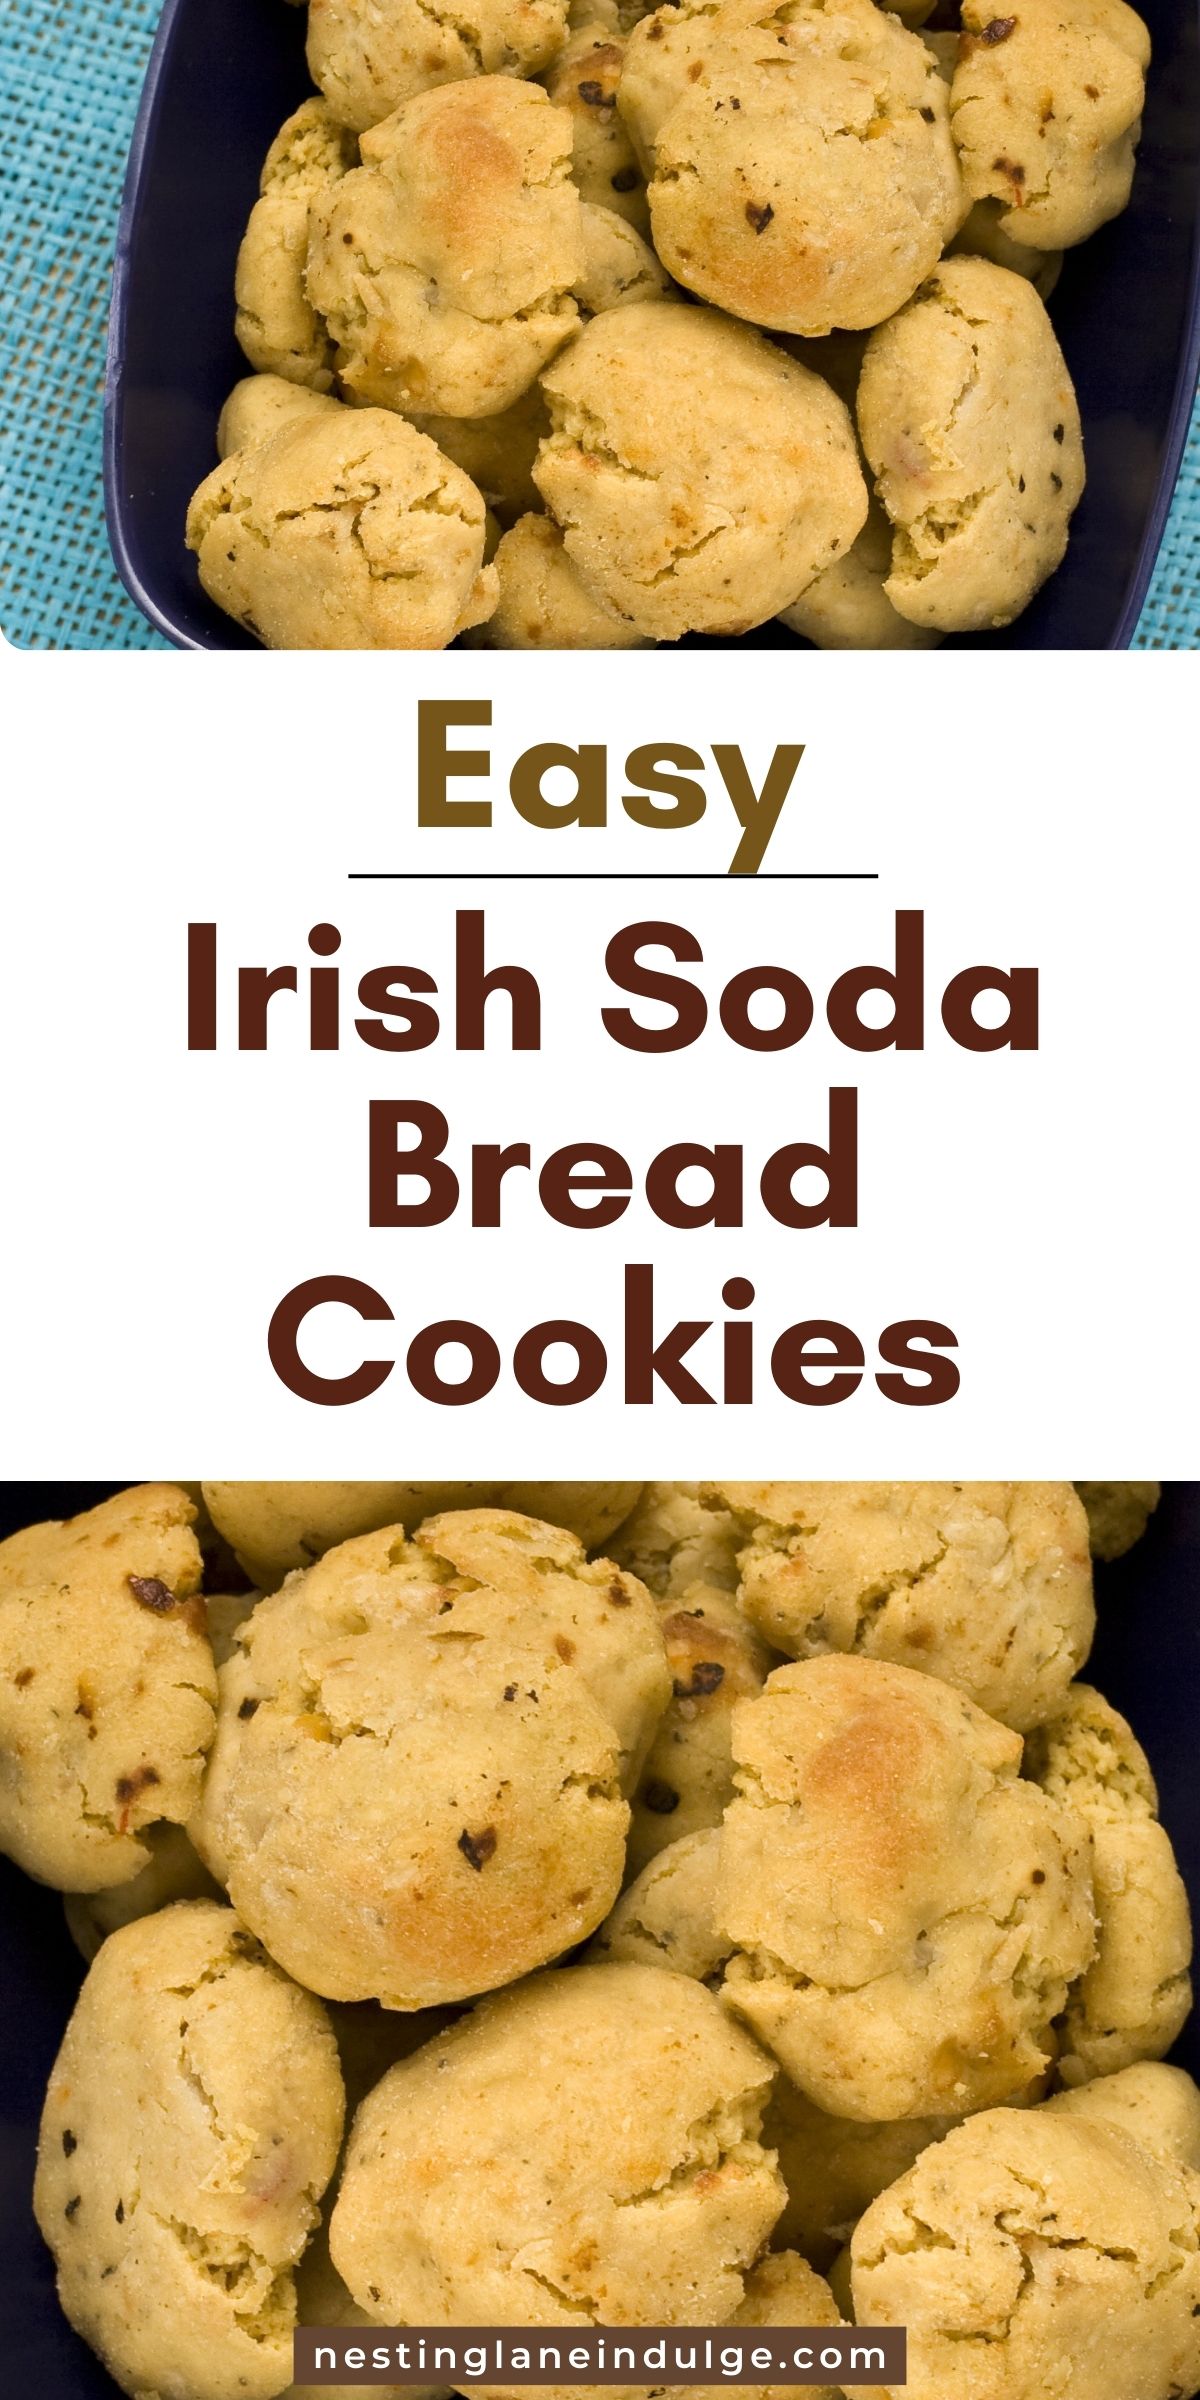 Promotional image for Easy Irish Soda Bread Cookies showing a navy blue oval dish filled with round, golden-brown cookies on a turquoise background, with text above.